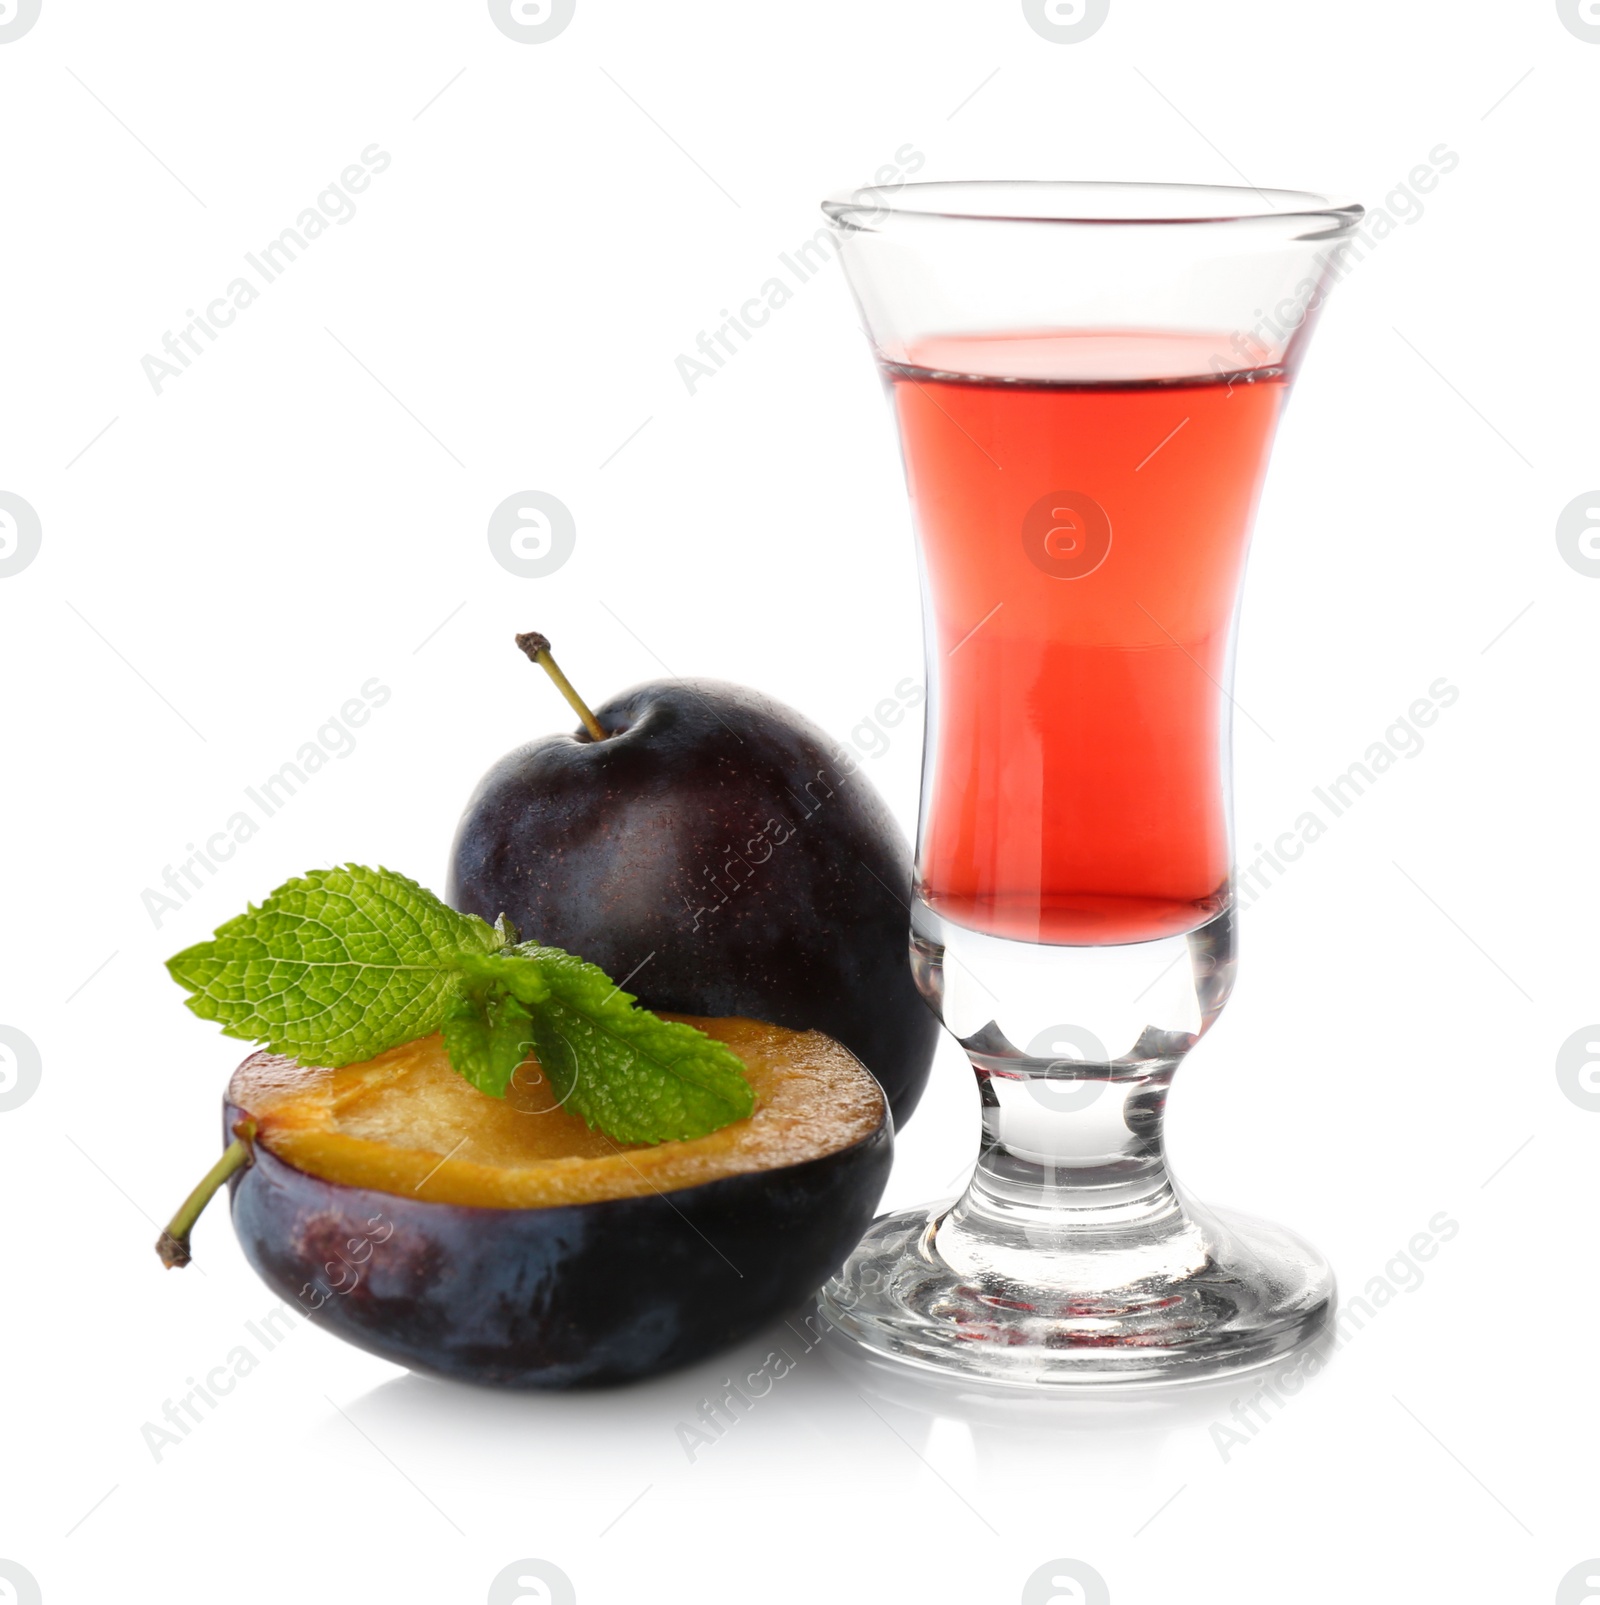 Photo of Delicious plum liquor, ripe fruits and mint on white background. Homemade strong alcoholic beverage